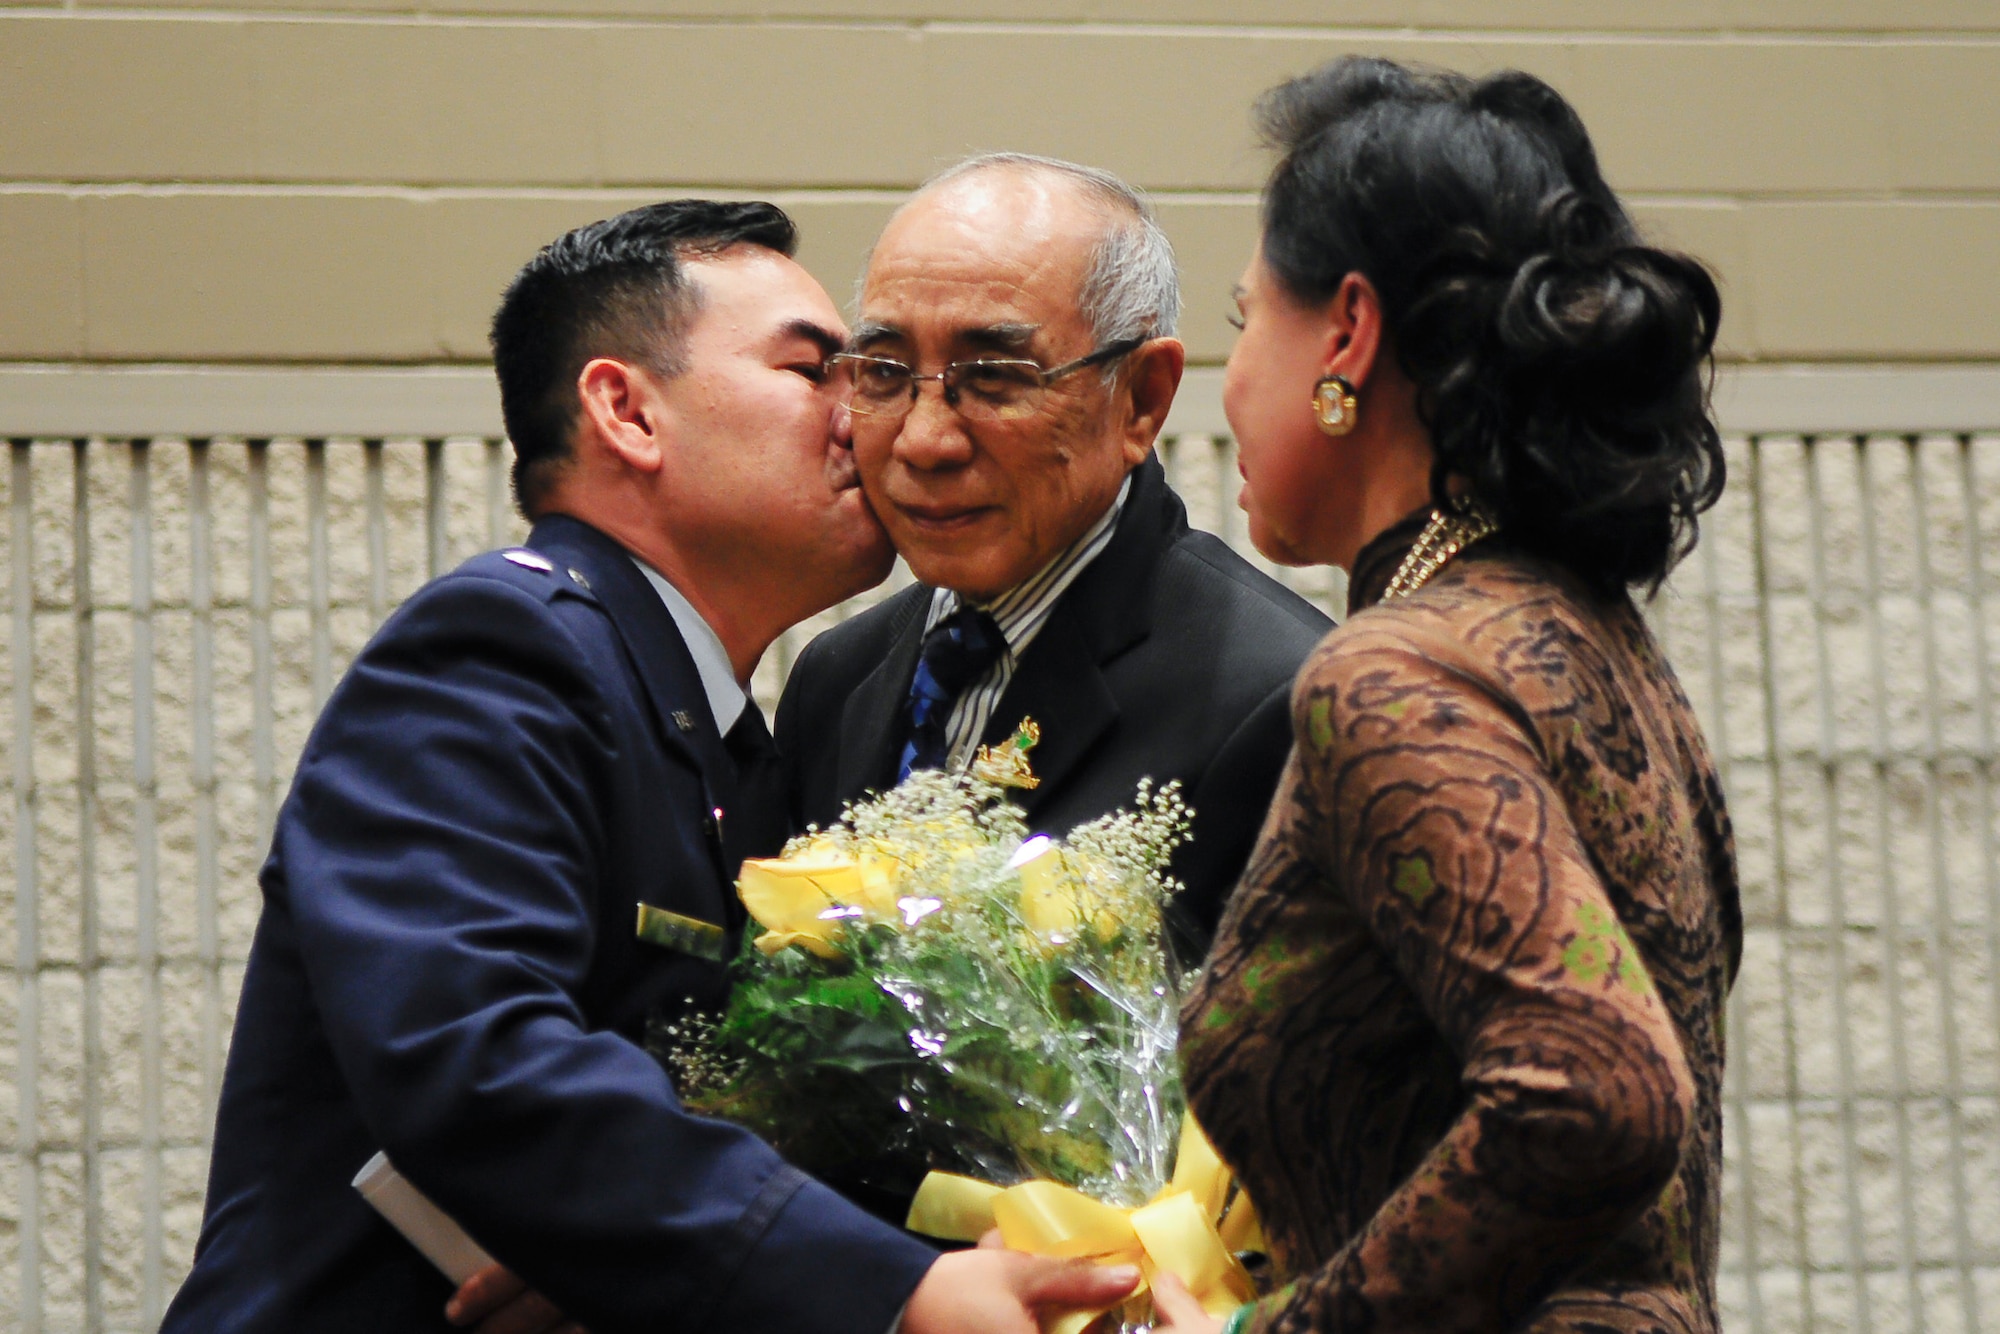 Air Force Lt. Col. Don Nguyen, assistant director of operations for the 273rd Information Operations Squadron (IOS), Texas Air National Guard, with his parents, Phuoc and Mai Nguyen, during his retirement ceremony in San Antonio, Nov. 23, 2014. Nguyen retired after 27 years of military service, including time with the Texas Army and Air National Guards. (U.S. Air National Guard photo by Tech. Sgt. Eric L. Wilson / Released) 141123-Z-IT549-003